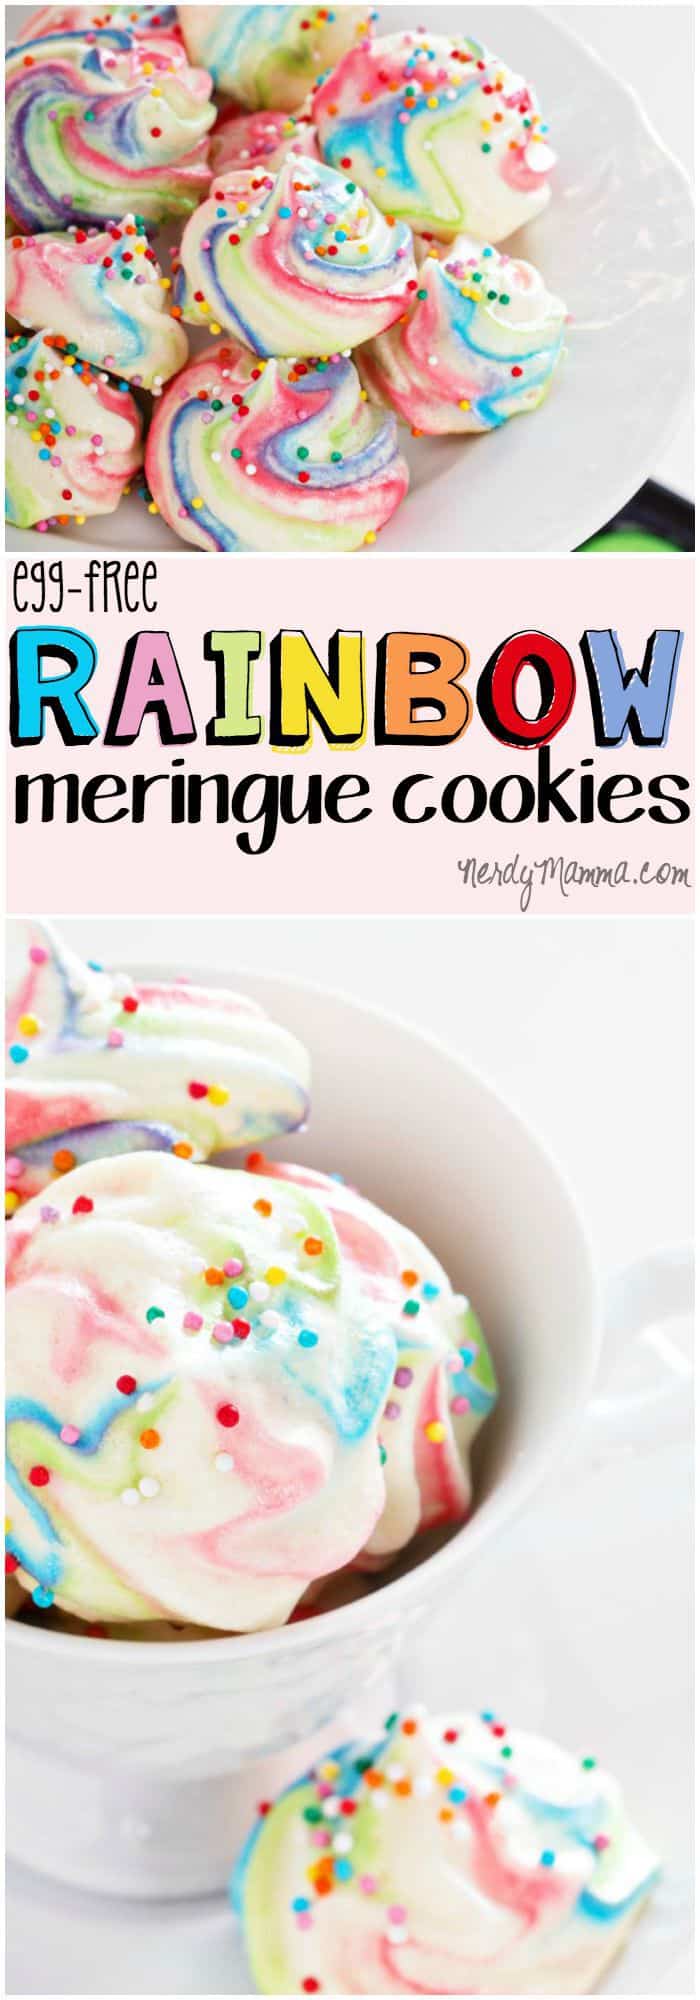 These rainbow meringue cookies were so freakin' easy to make! And the kids loved them! (and they're vegan--which is awesome)